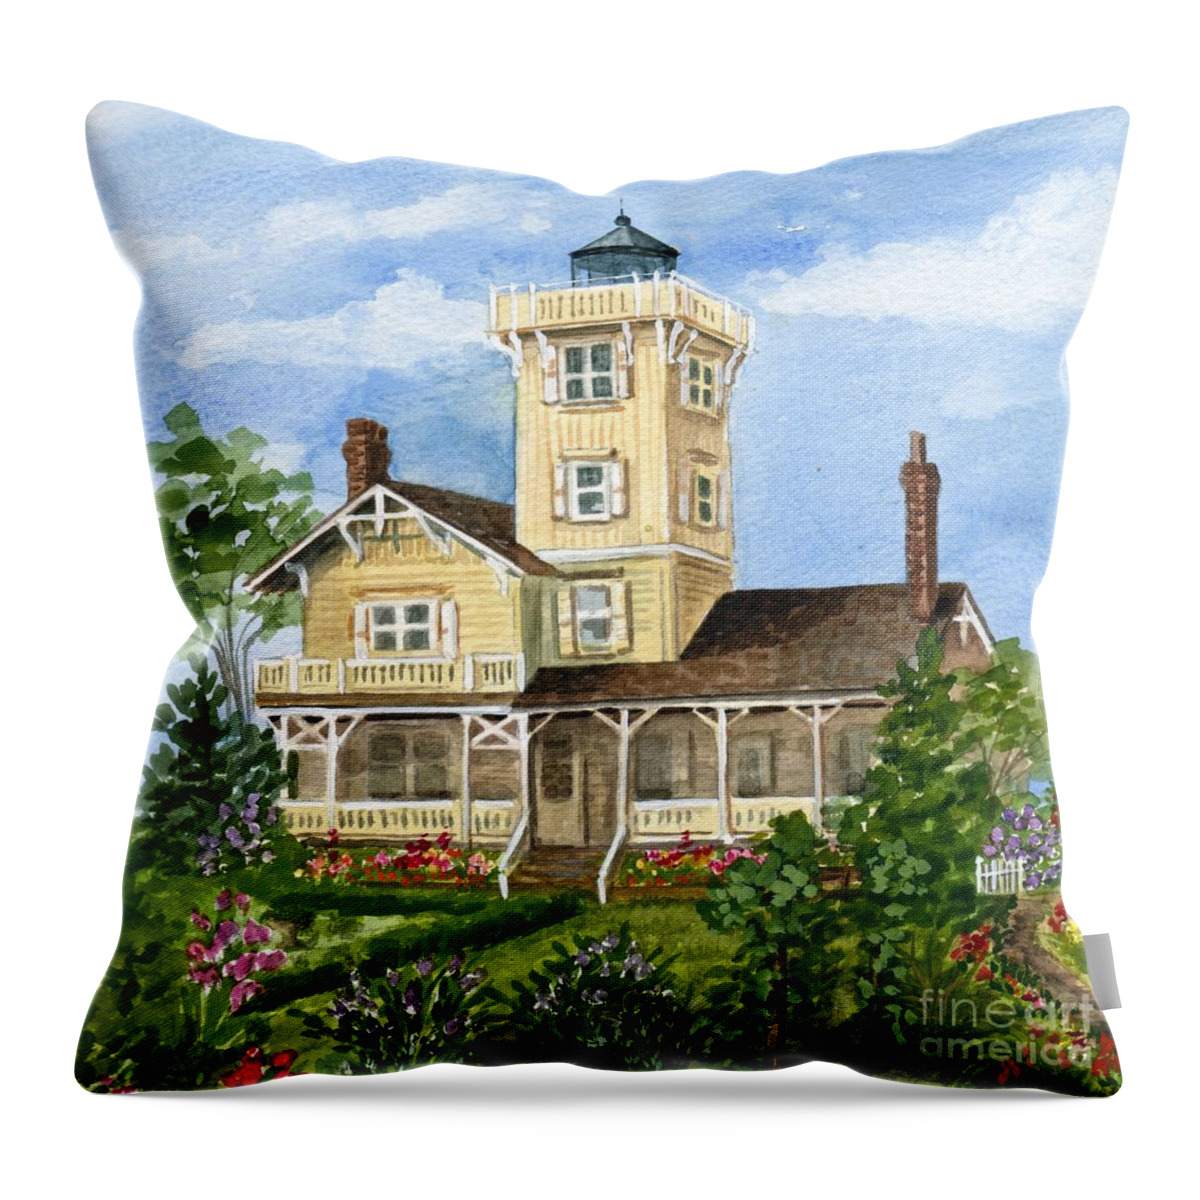 Hereford Inlet Lighthouse Throw Pillow featuring the painting Hereford Inlet Lighthouse and Gardens 2 by Nancy Patterson